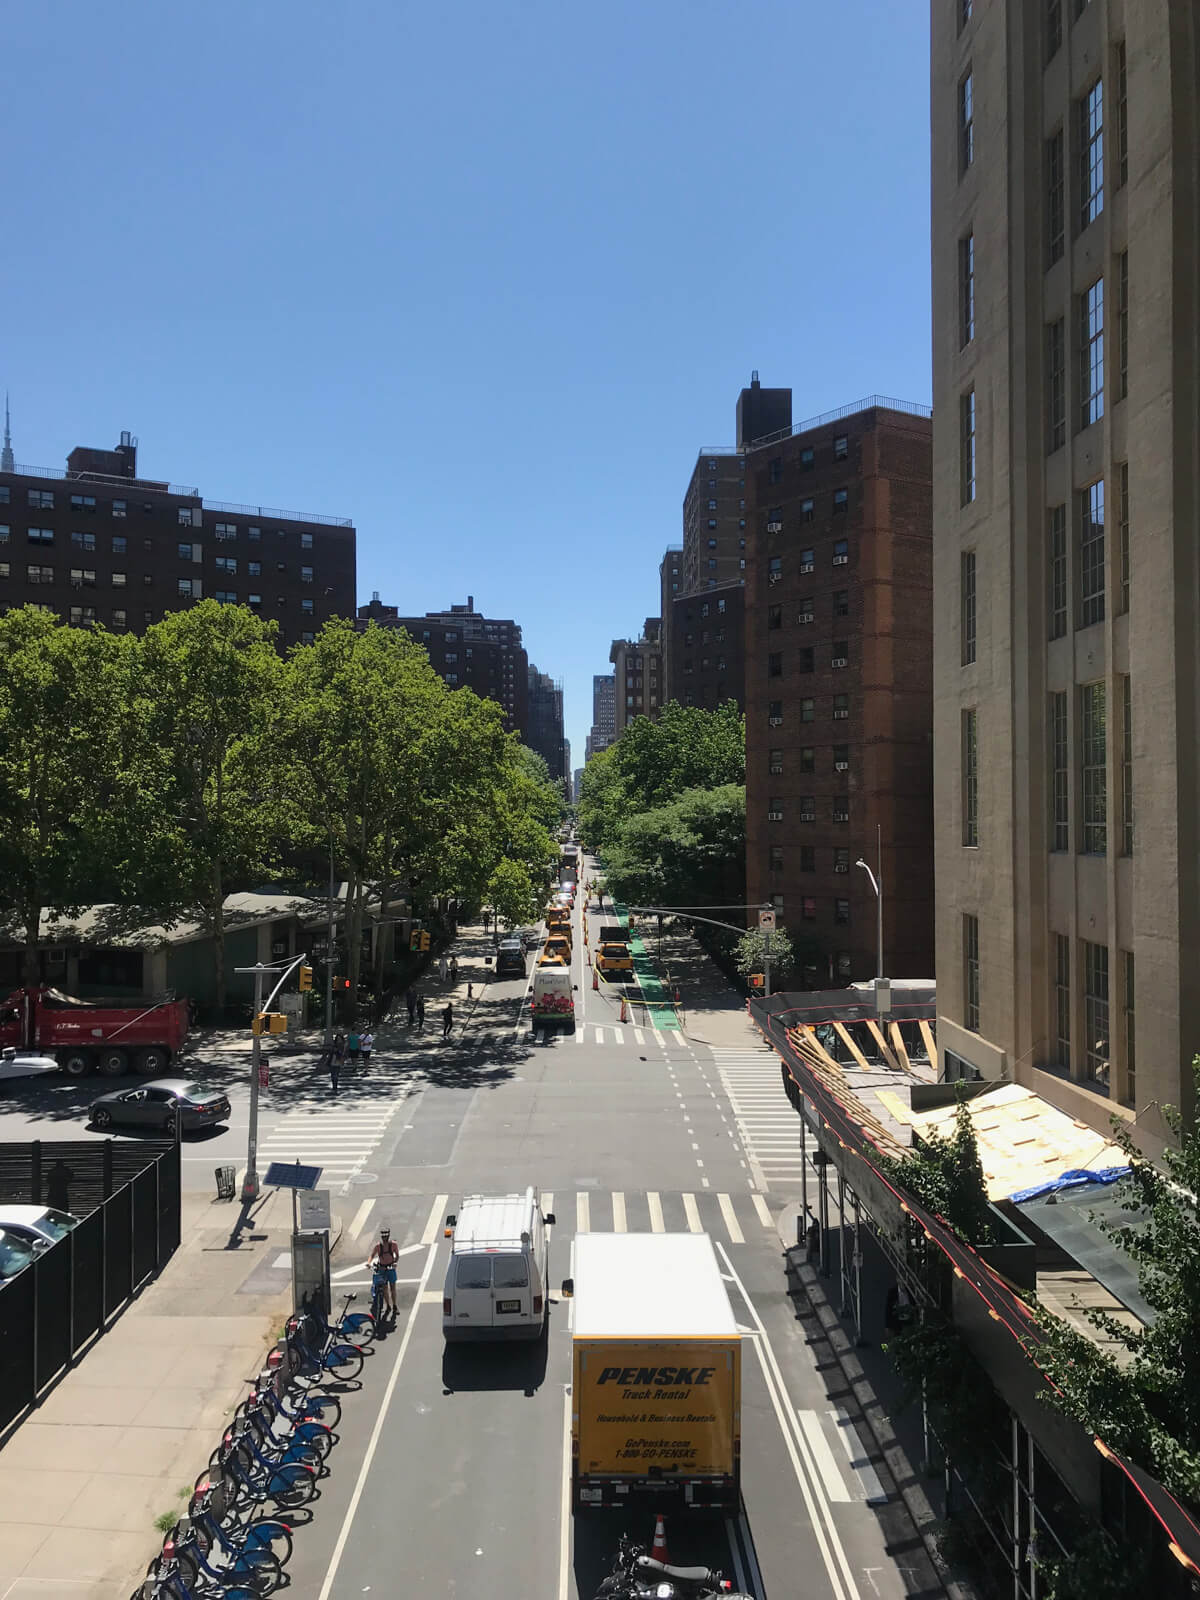 A daytime, high-angle view of a street in New York on a sunny day. Many bicycles are parked on the side of the street and there are a couple of vans and small trucks driving on the street